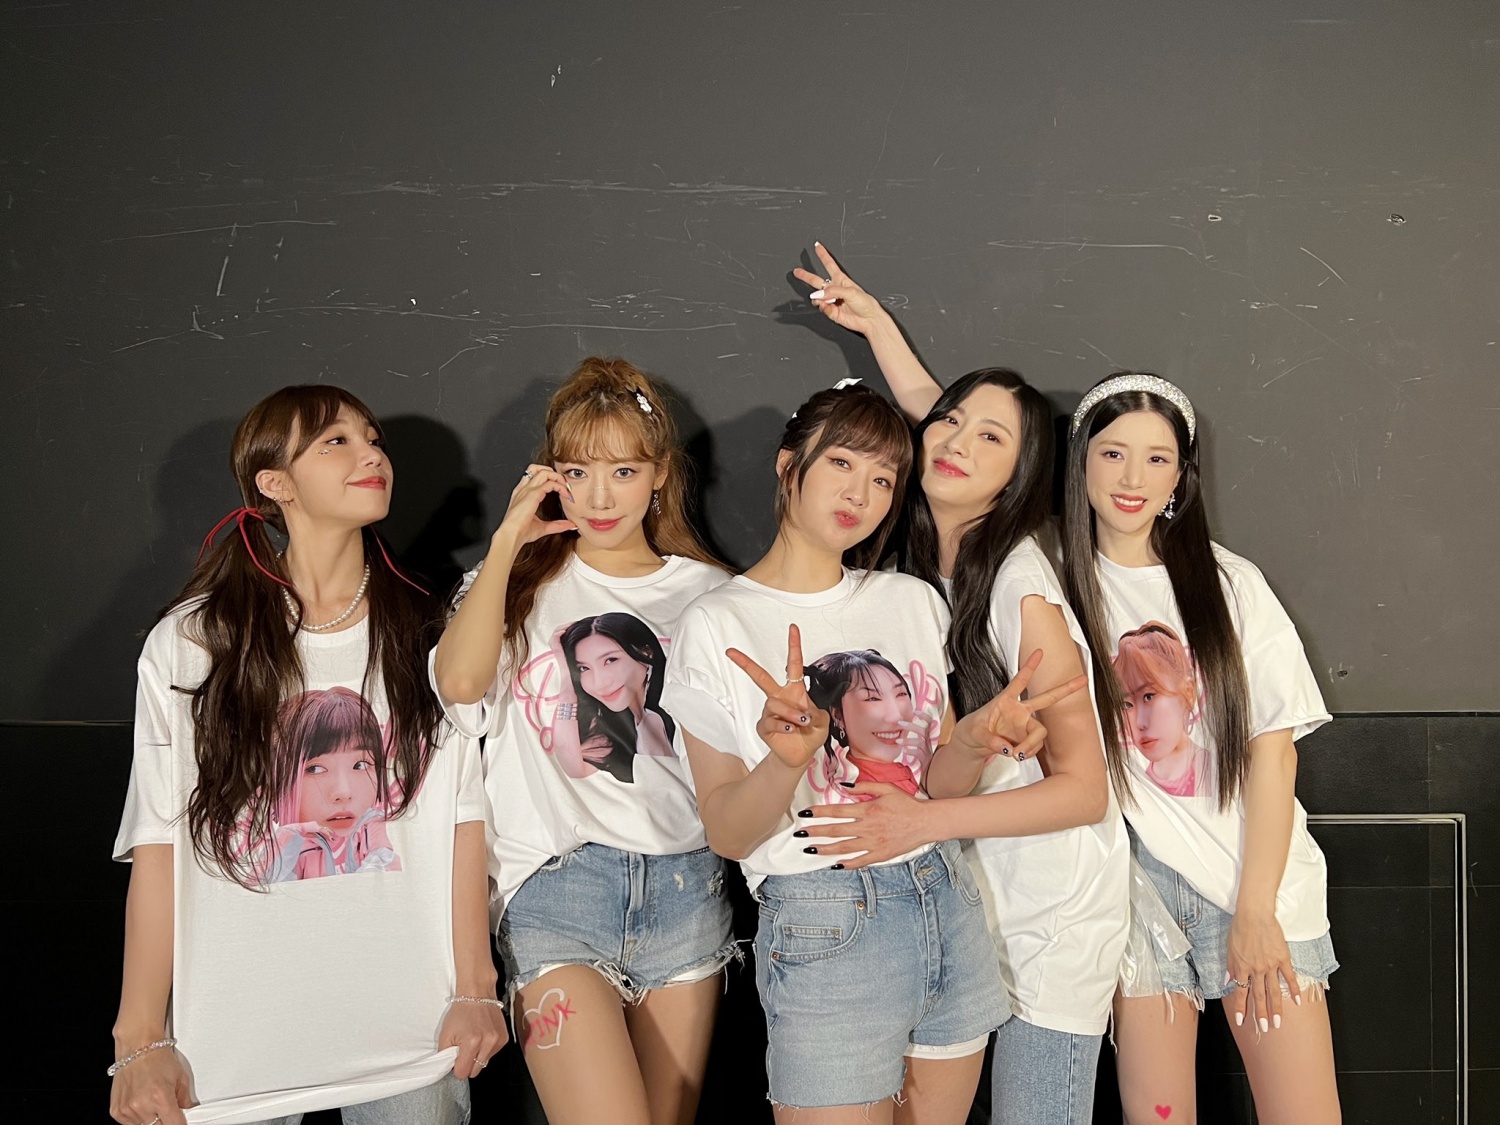 Apink successfully wraps up fan concert in Japan... "Every moment is happy"